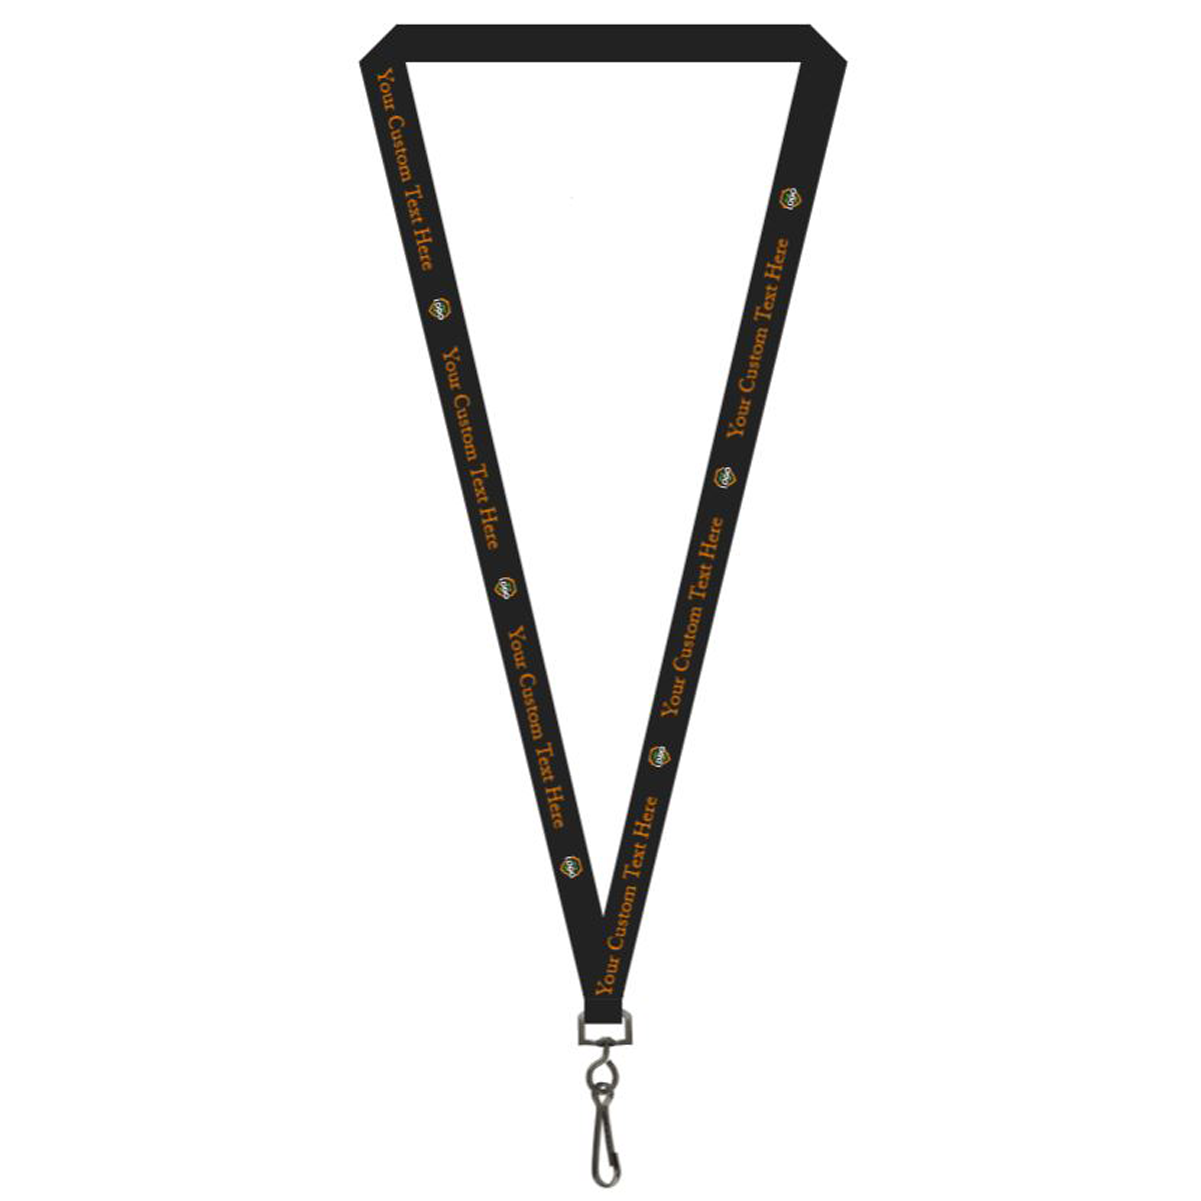 A black lanyard with customizable text printed in orange along its length using silk screen printing. It includes a metal swivel hook at the bottom. Ideal for bulk Custom Printed Lanyards Online Designer - Personalized Lanyards for Company, Conference, and VIP Events, take advantage of our quantity discounts for large orders.